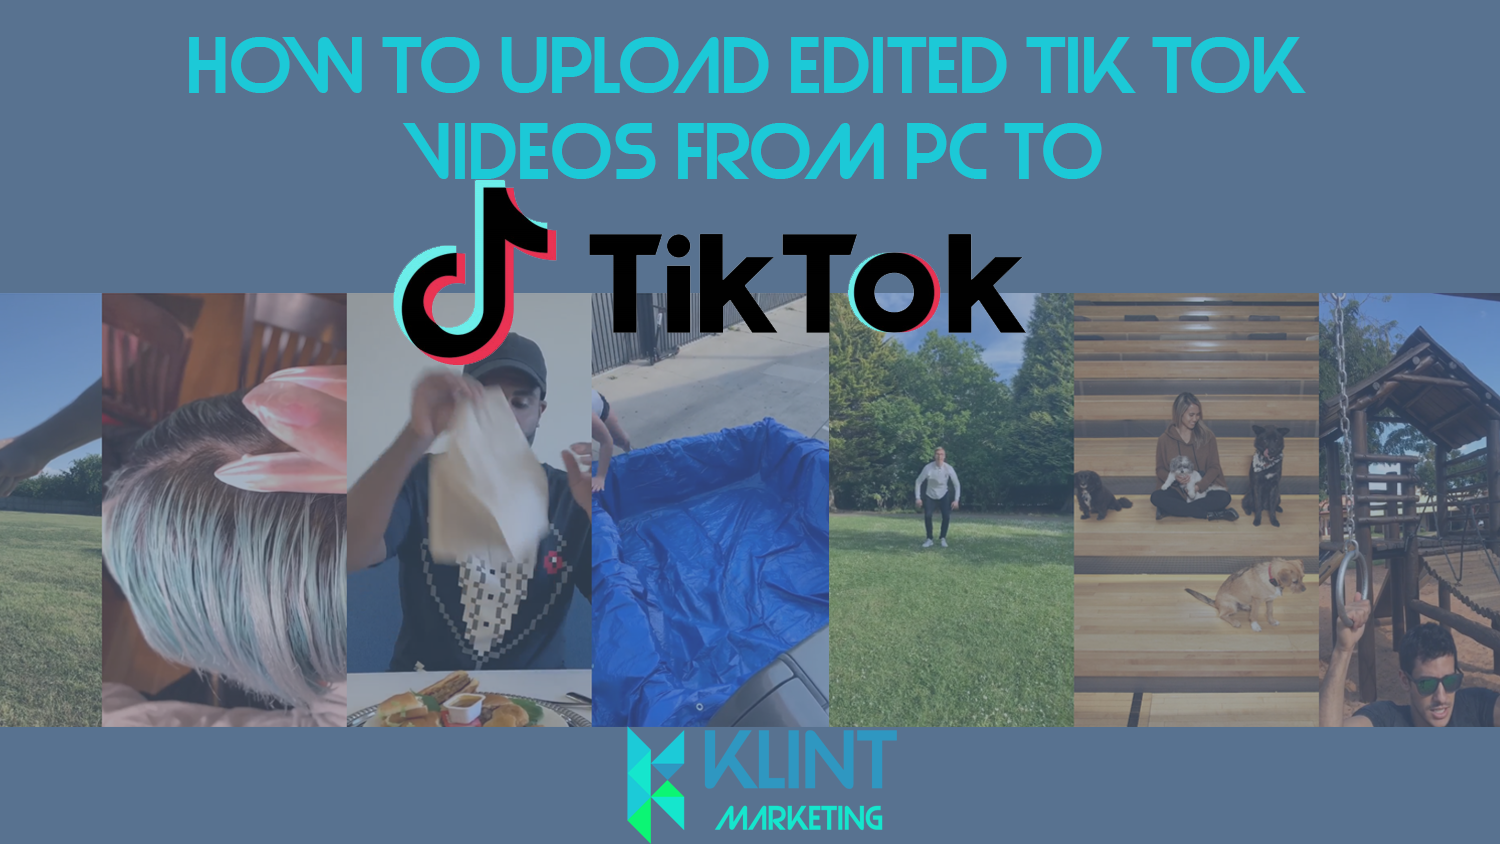 How To Upload Edited Tik Tok Videos From Pc To Tik Tok 2020 Klint Marketing The Best Growth Hacking Agency In Copenhagen - how to fix upload fail did you use template in roblox 2019 youtube